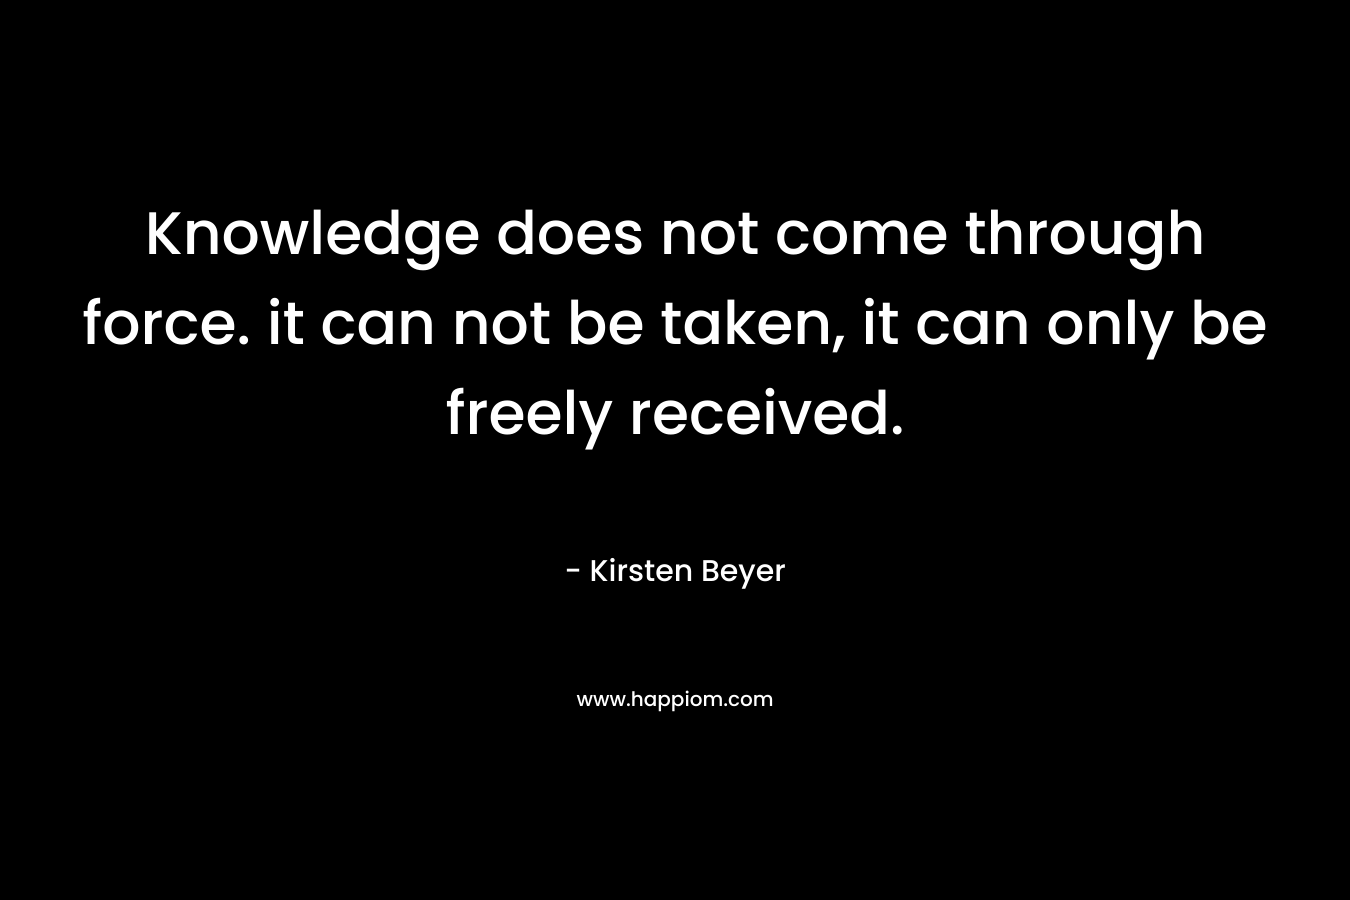 Knowledge does not come through force. it can not be taken, it can only be freely received.